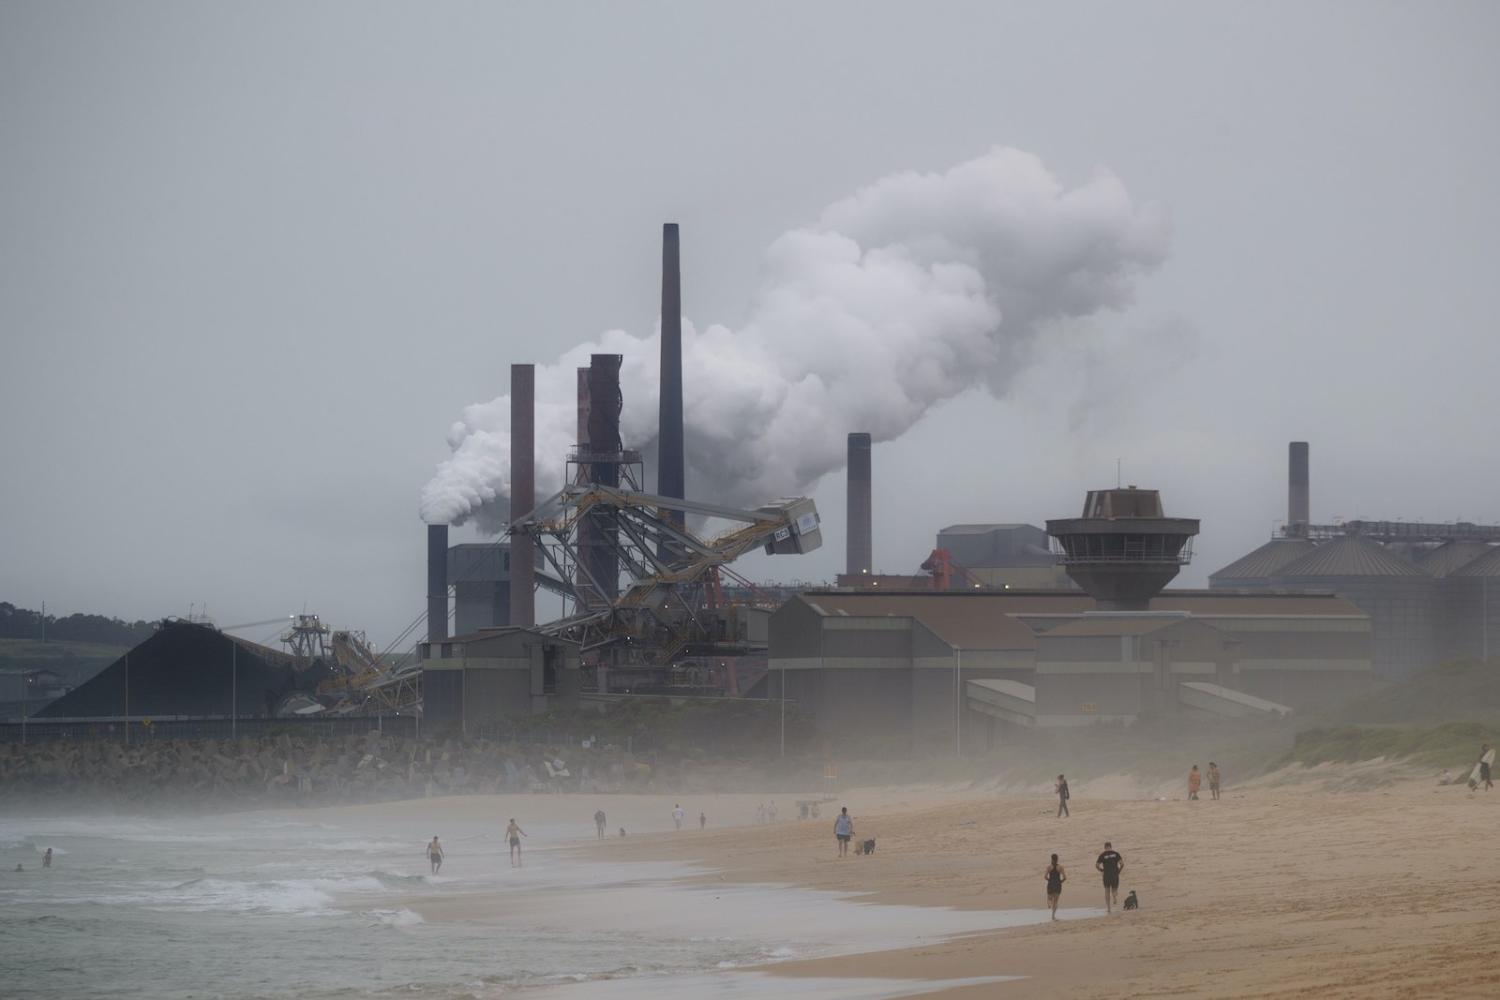 Steelworks and coal loading facility in Port Kembla, New South Wales, Australia, on 1 February 2021 (Brook Mitchell/Getty Images)